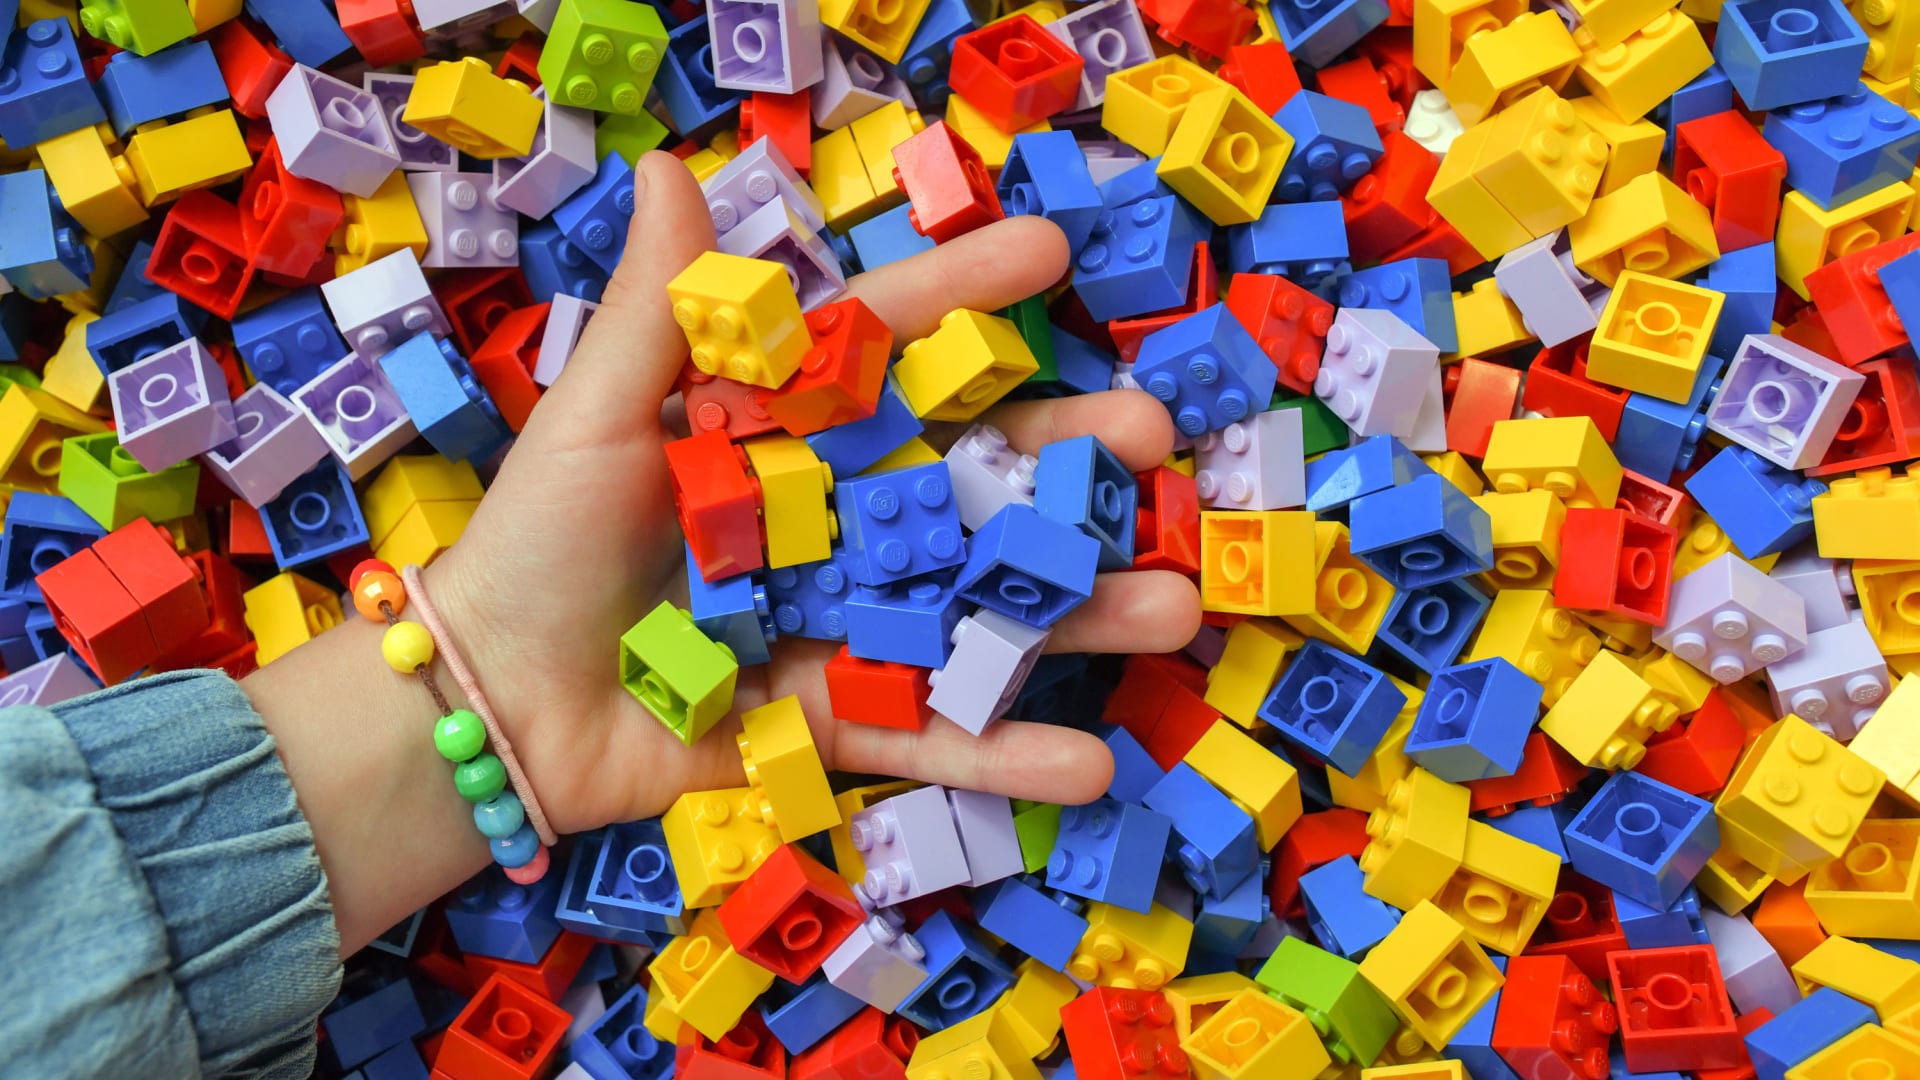 A 7-Year-Old Wrote to Lego Asking for a Job. The Company's Response Was Brilliant |